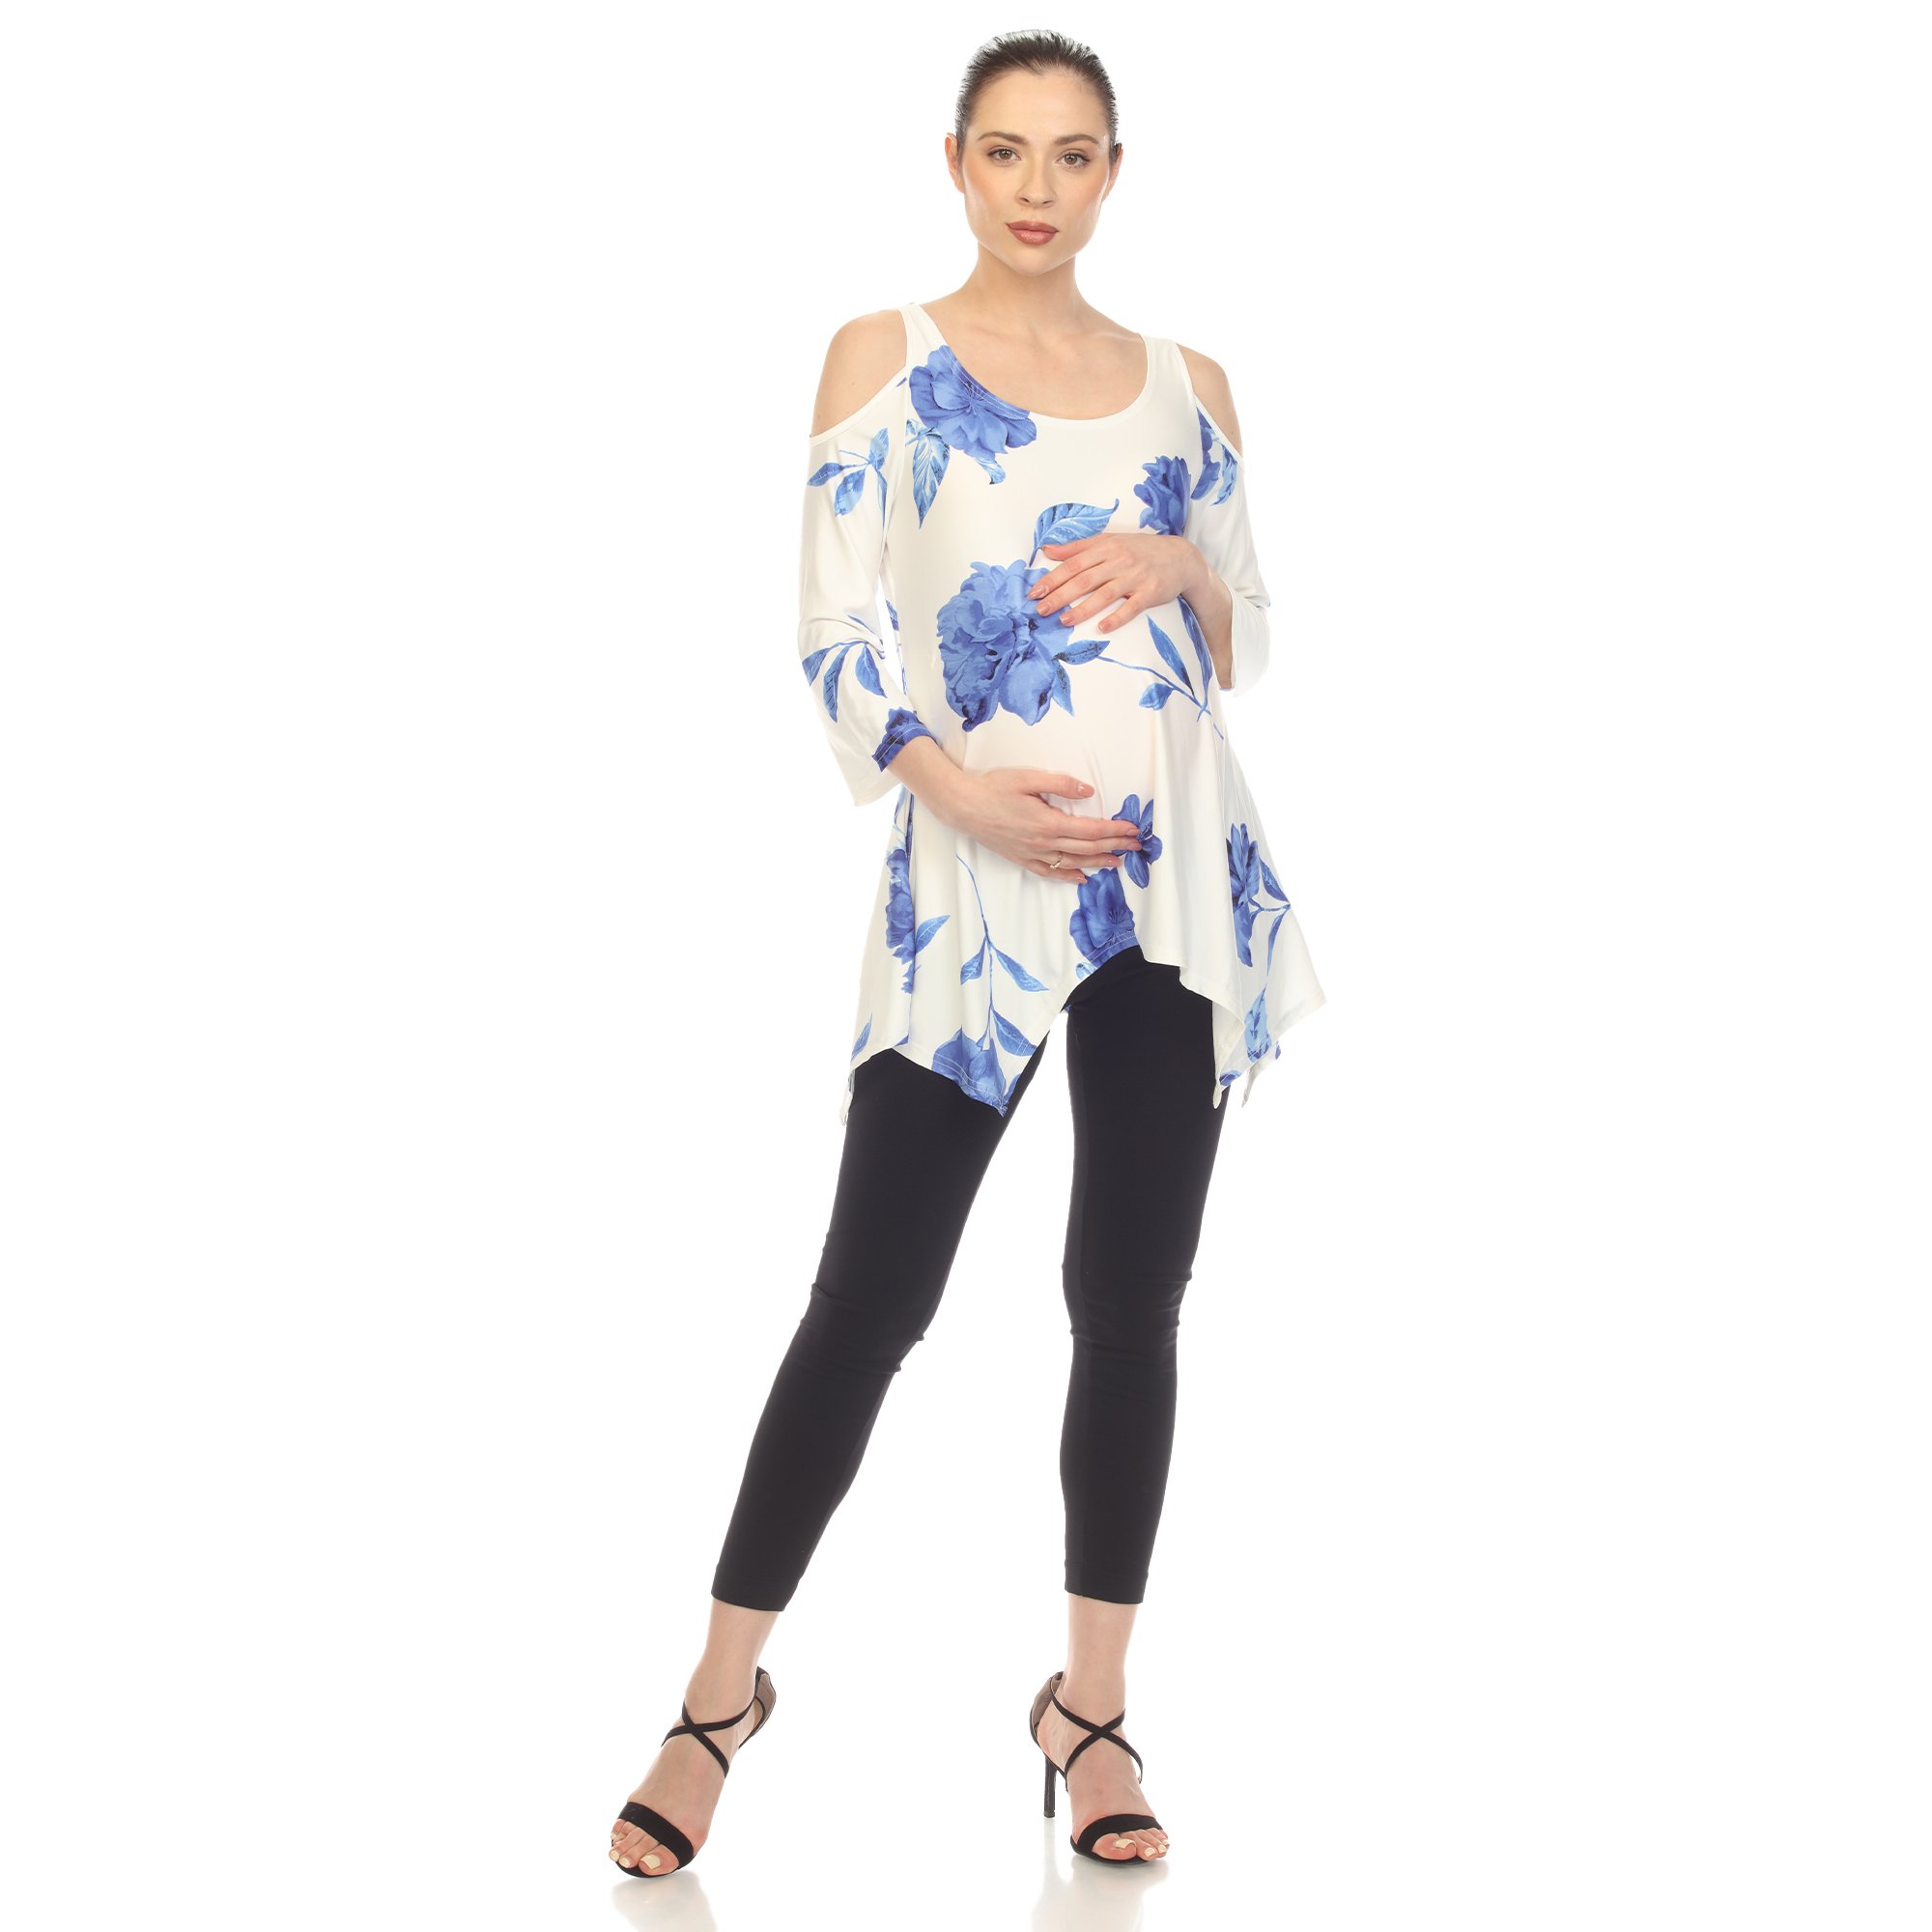 White Mark Women's Maternity Floral Cold Shoulder Tunic Top - White/Blue, 2X